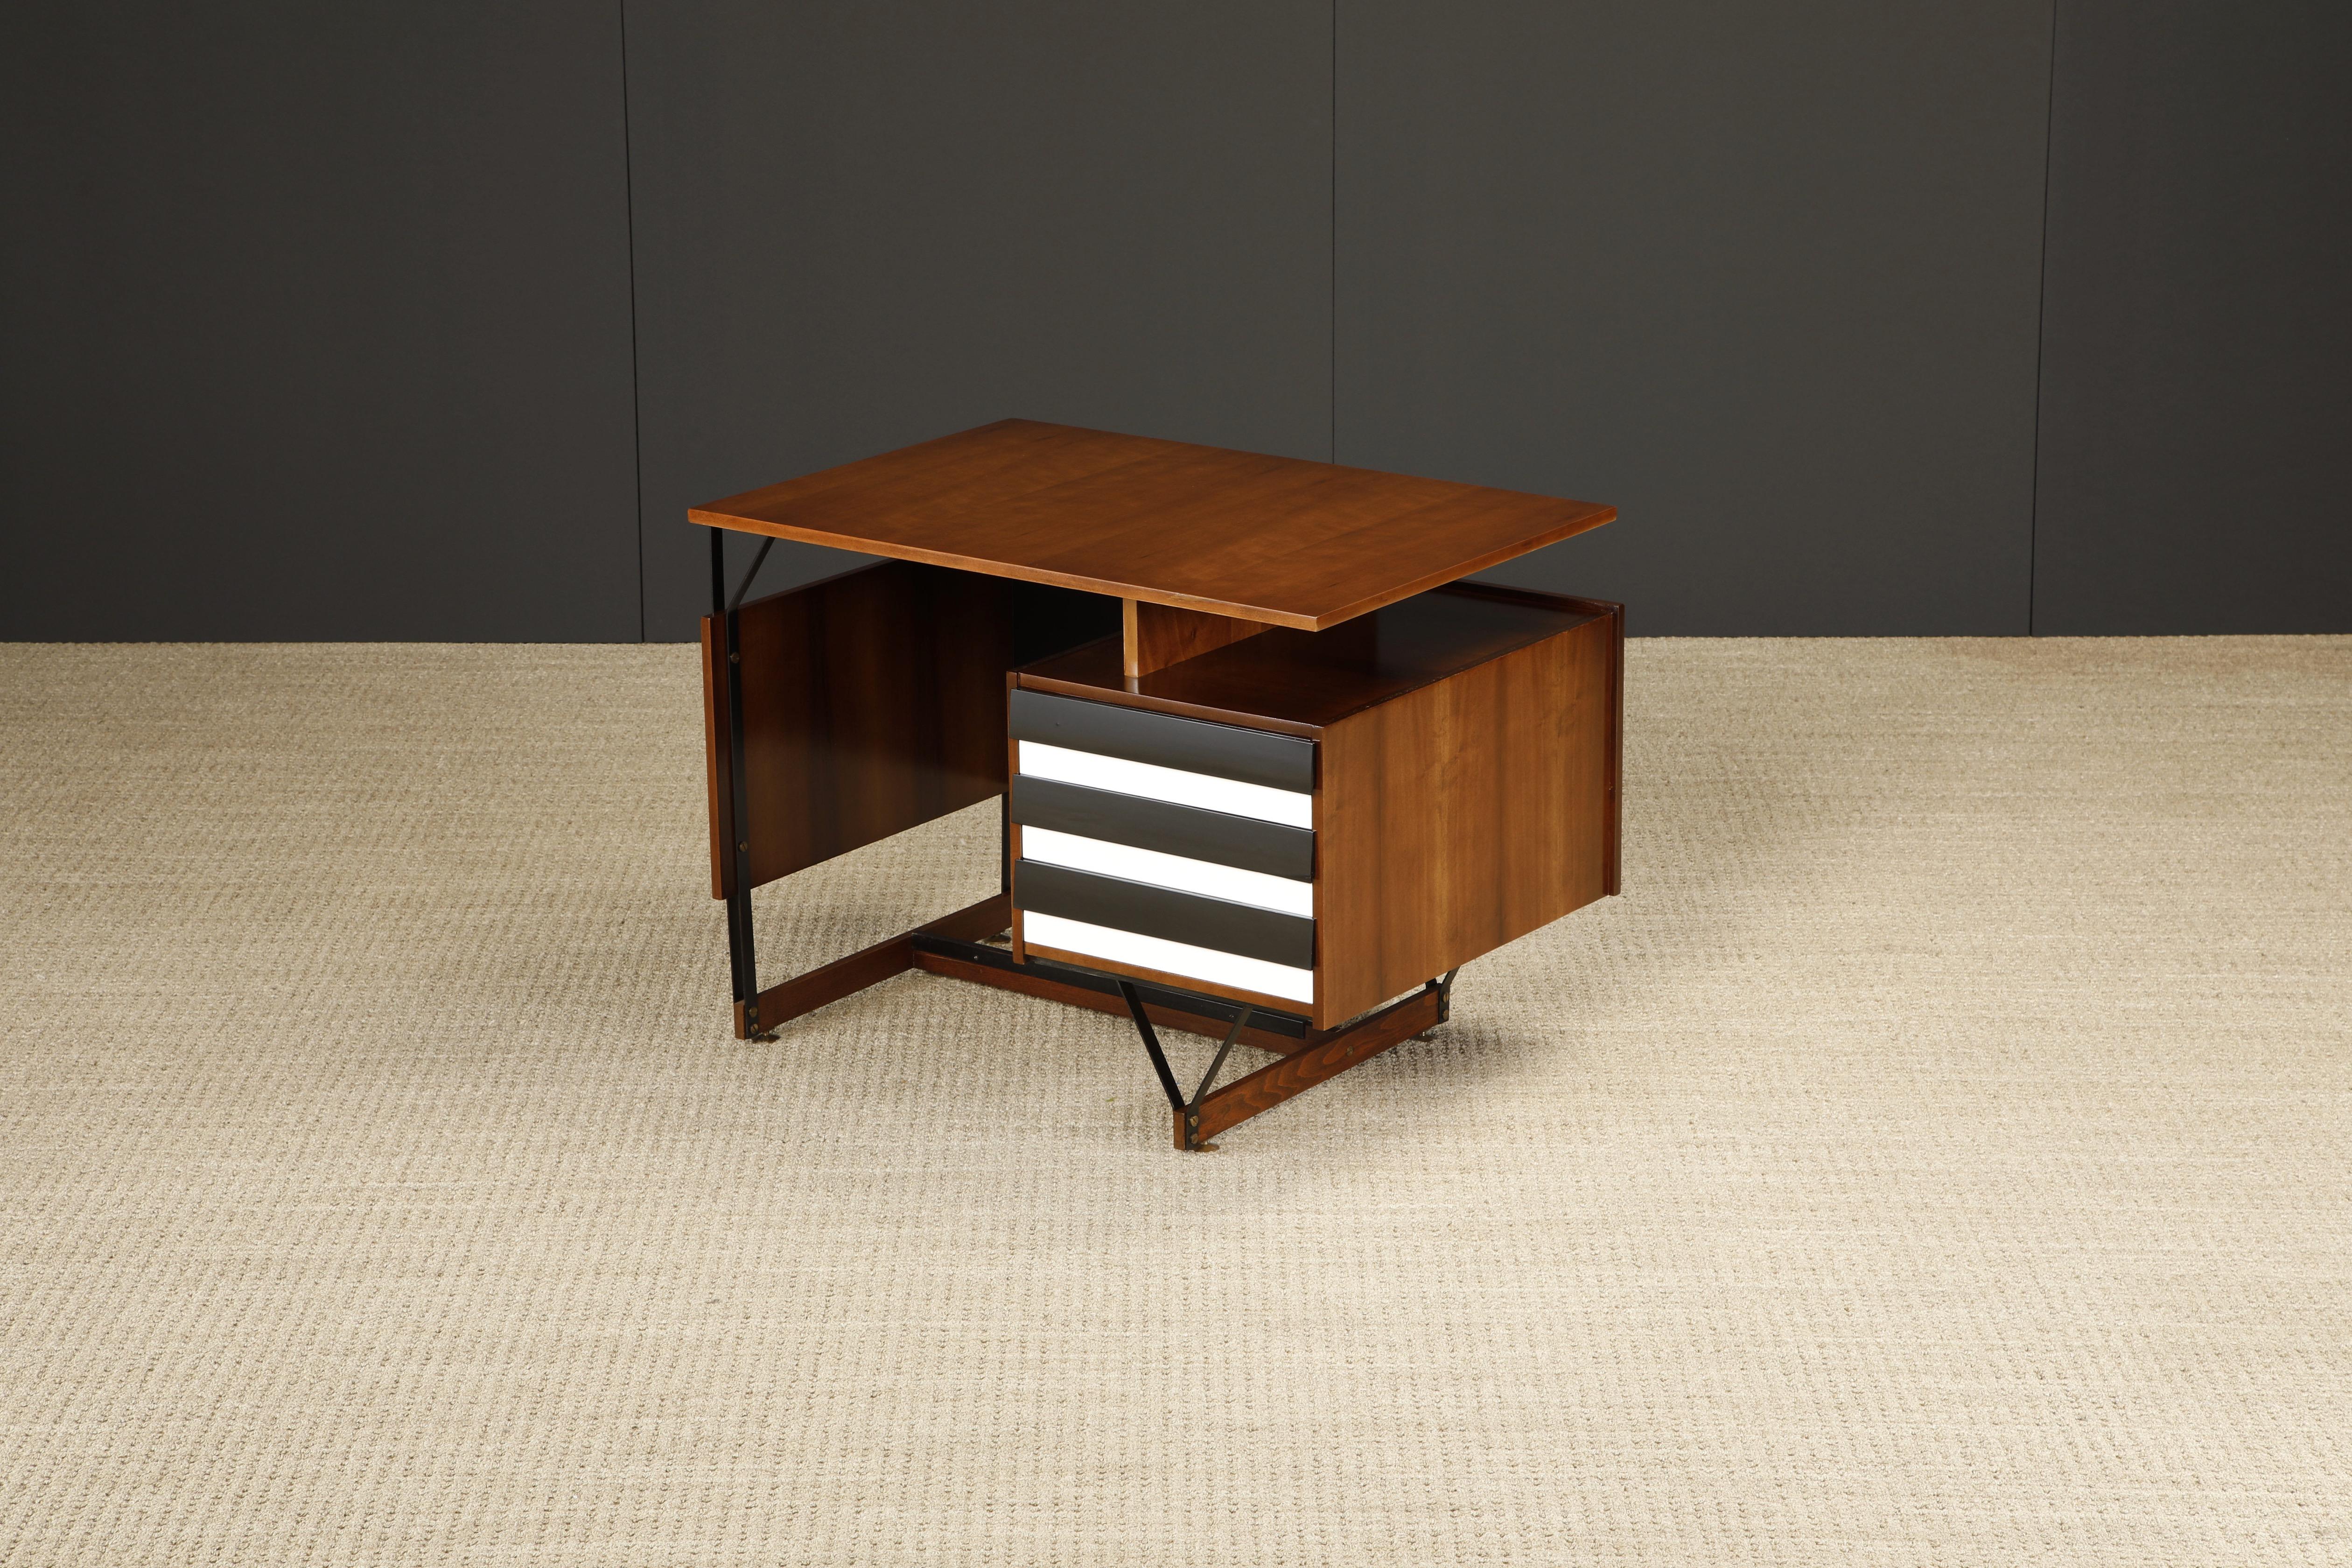 Italian Mid-Century Modern Desk, Style of Gio Ponti, c 1950s, Refinished For Sale 13